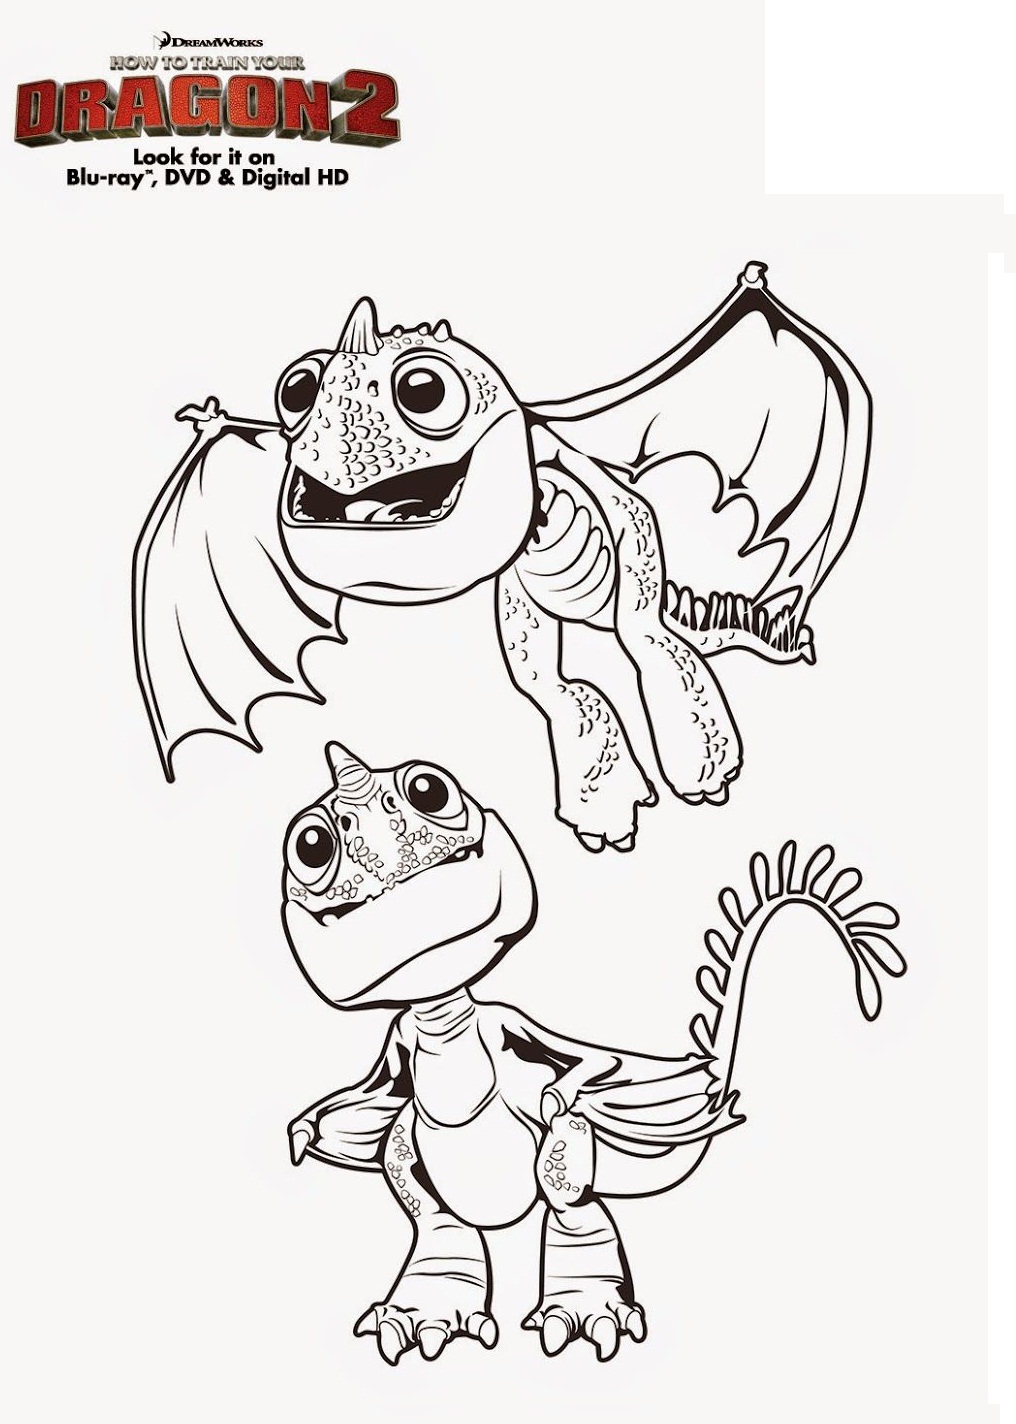 Baby Dragons Coloring Page - Free Printable Coloring Pages for Kids